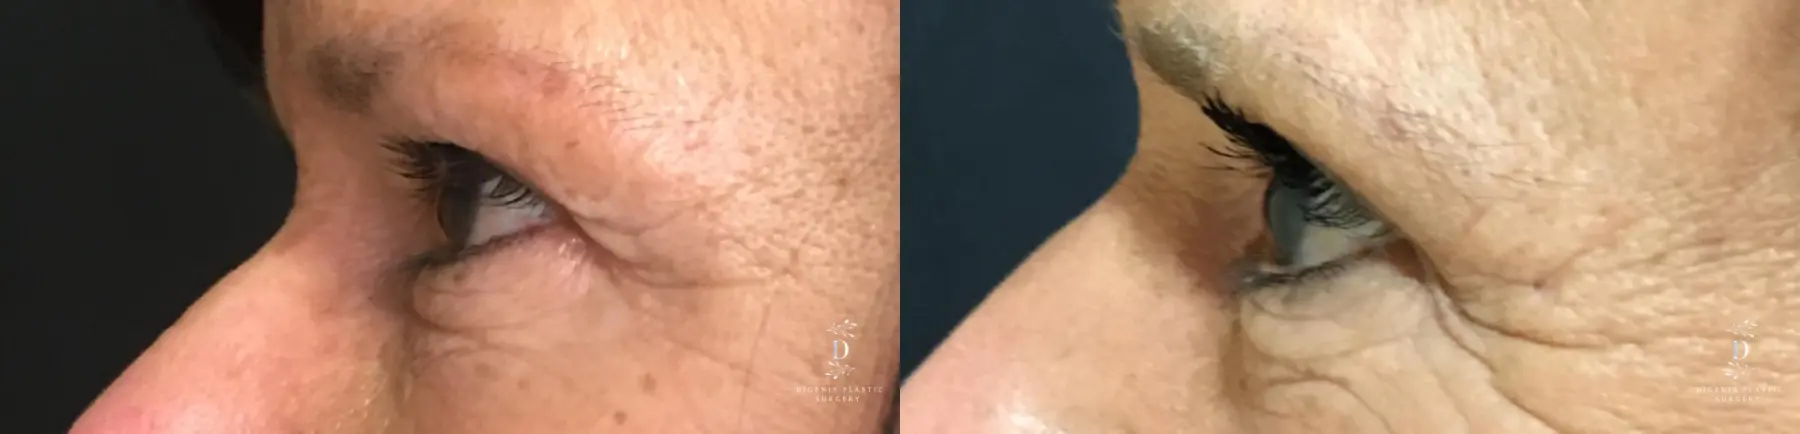 Eyelid Surgery: Patient 27 - Before and After 5